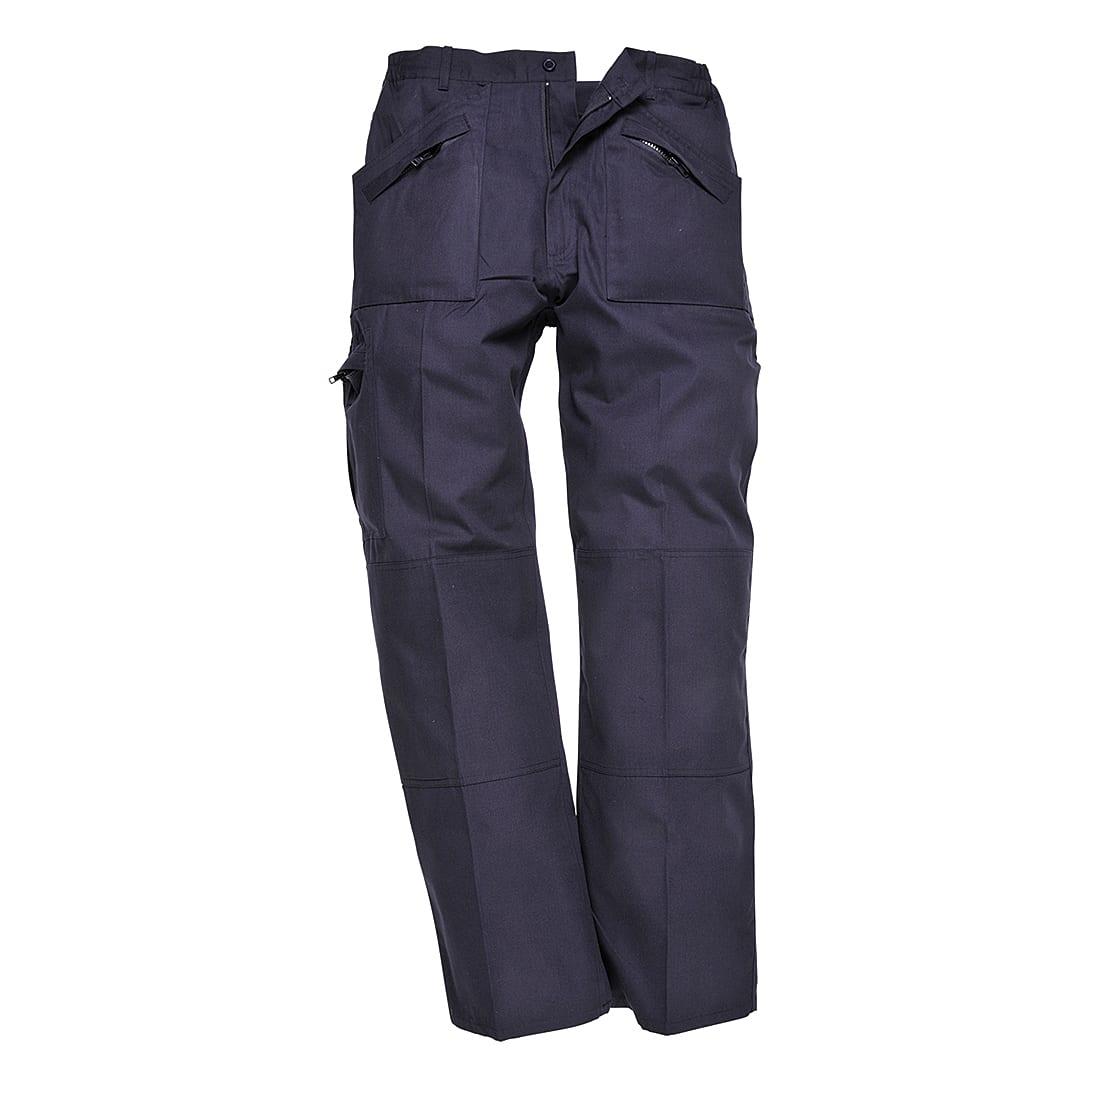 Portwest Classic Action Trousers - Texpel Finish in Navy (Product Code: S787)